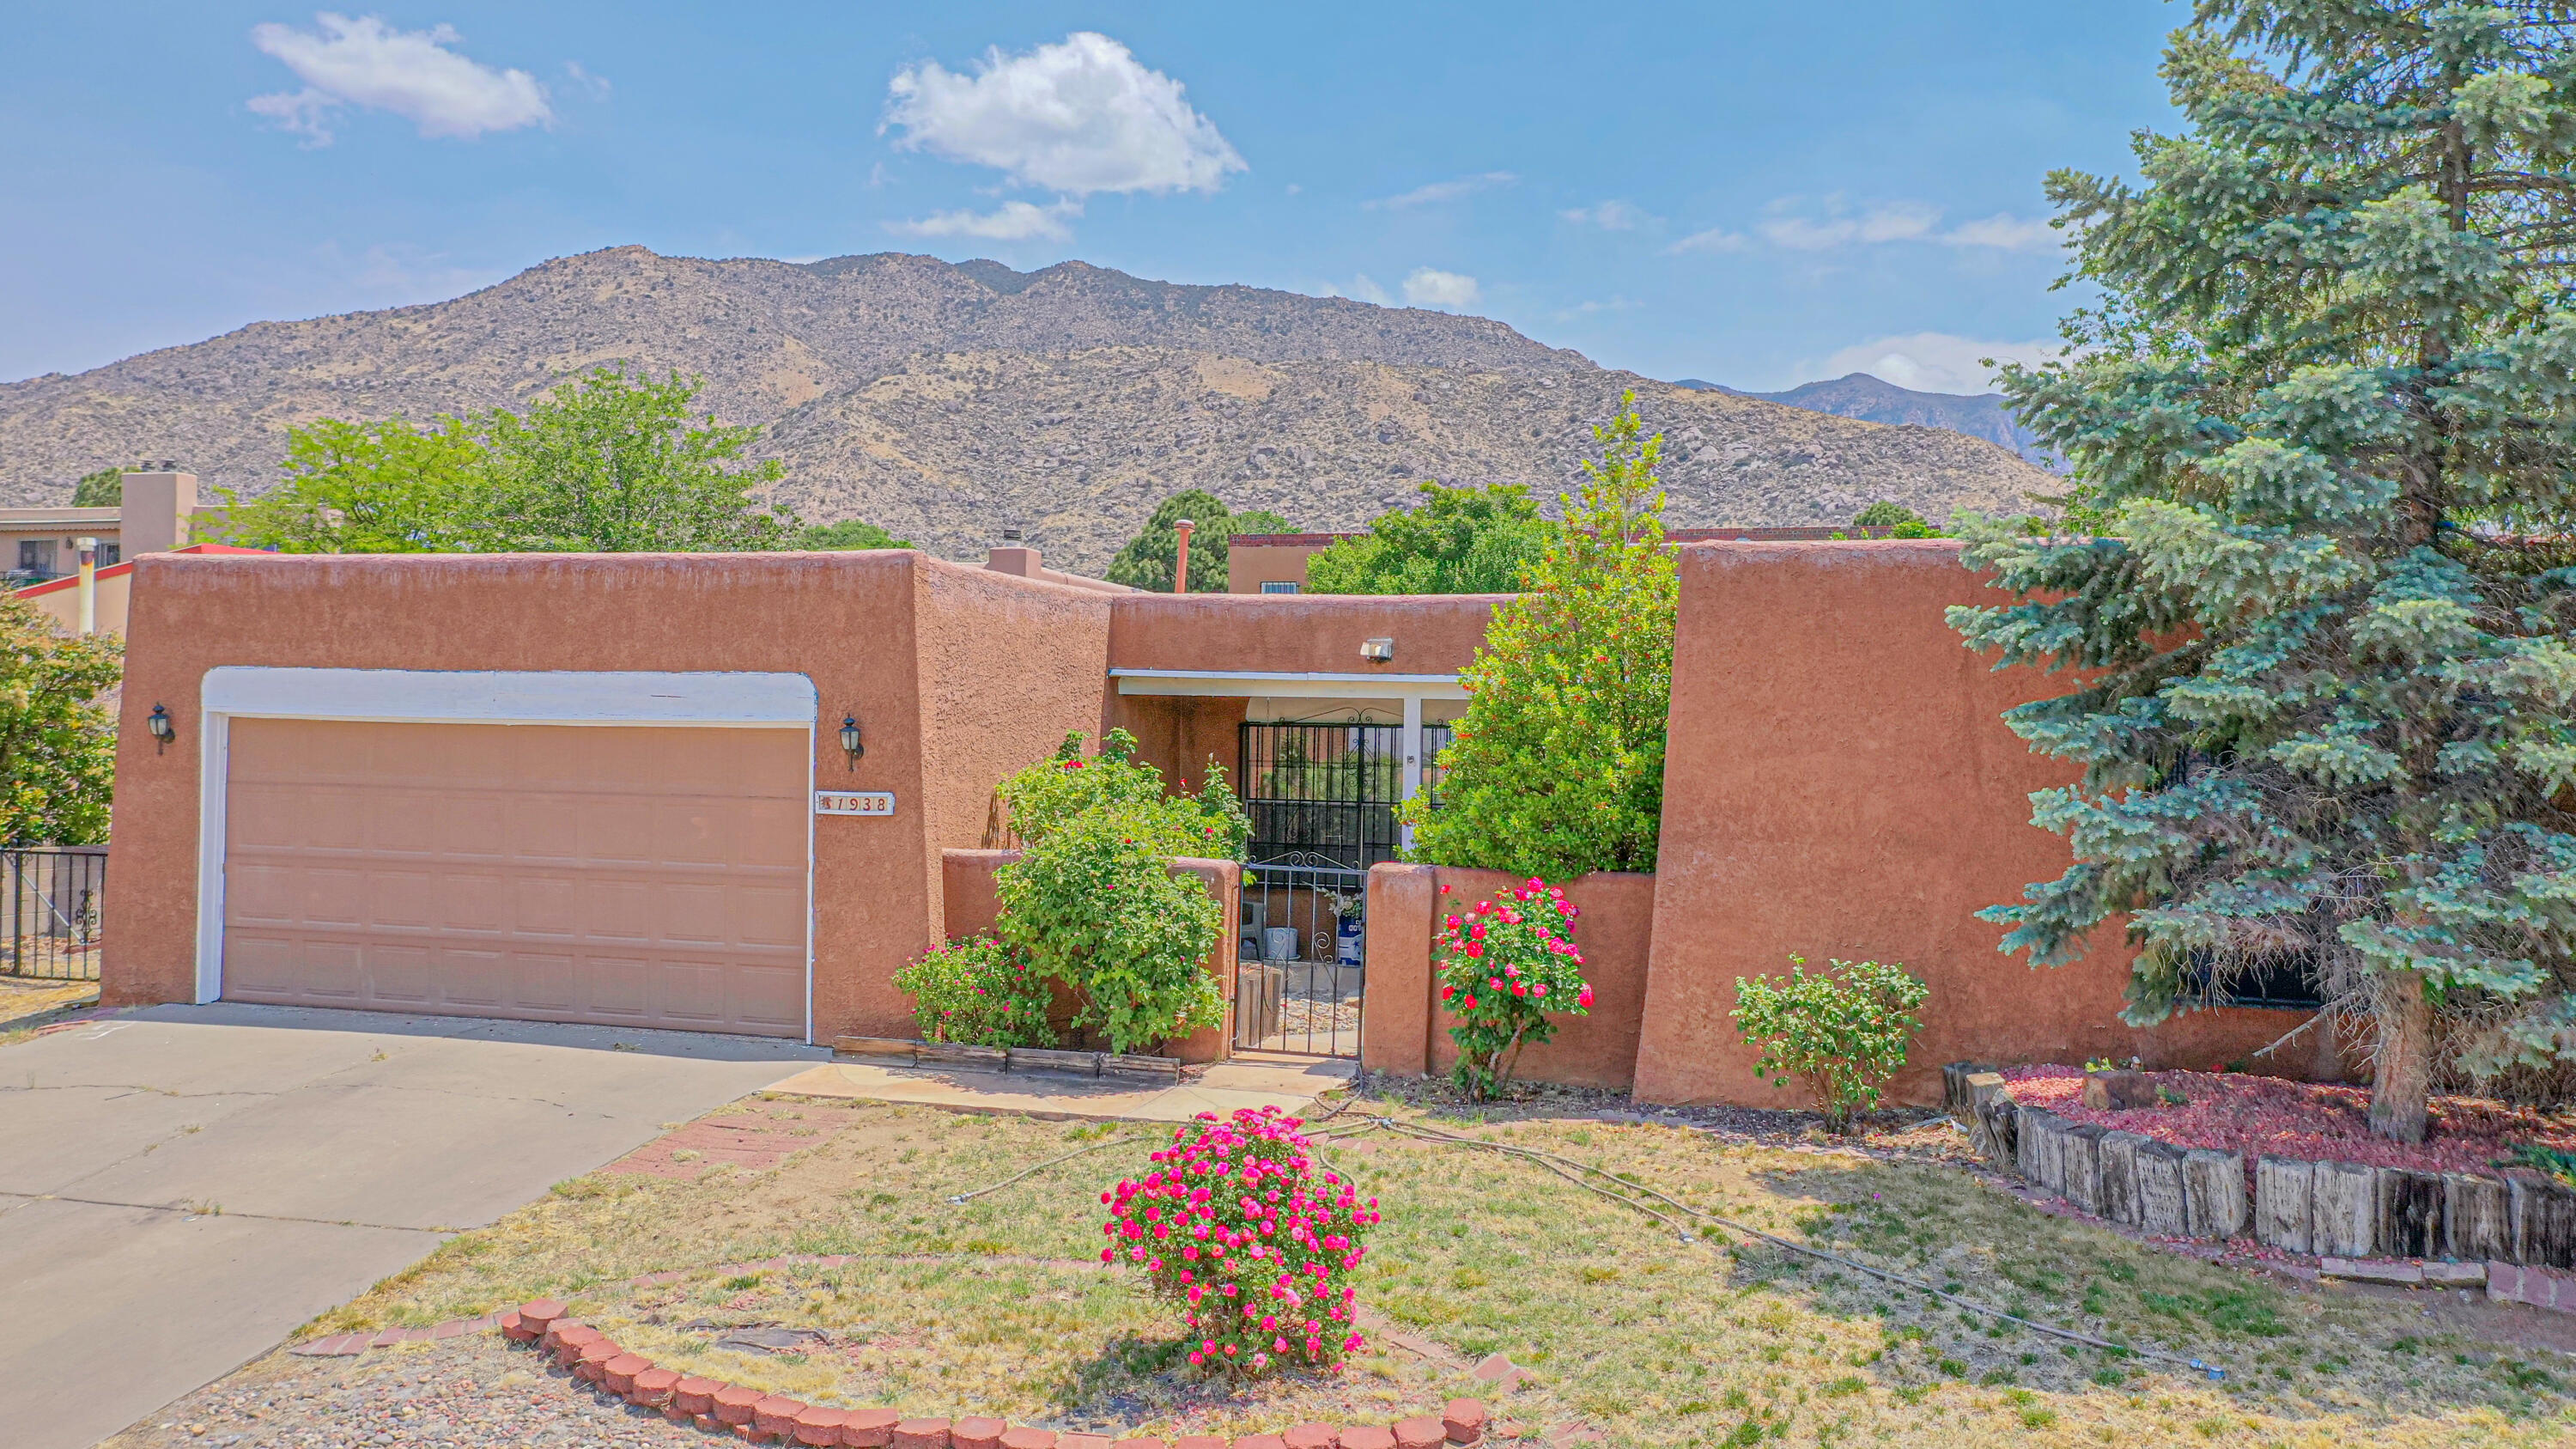 Spacious single level 4 bedroom, 2 bath home in the beautiful Foothills of Albuquerque. Brand new carpet and paint throughout. Enjoy summers in your refreshing inground gunite pool, while you enjoy beautiful backyard views of the Sandias. This one wont last long! Schedule your showing today.